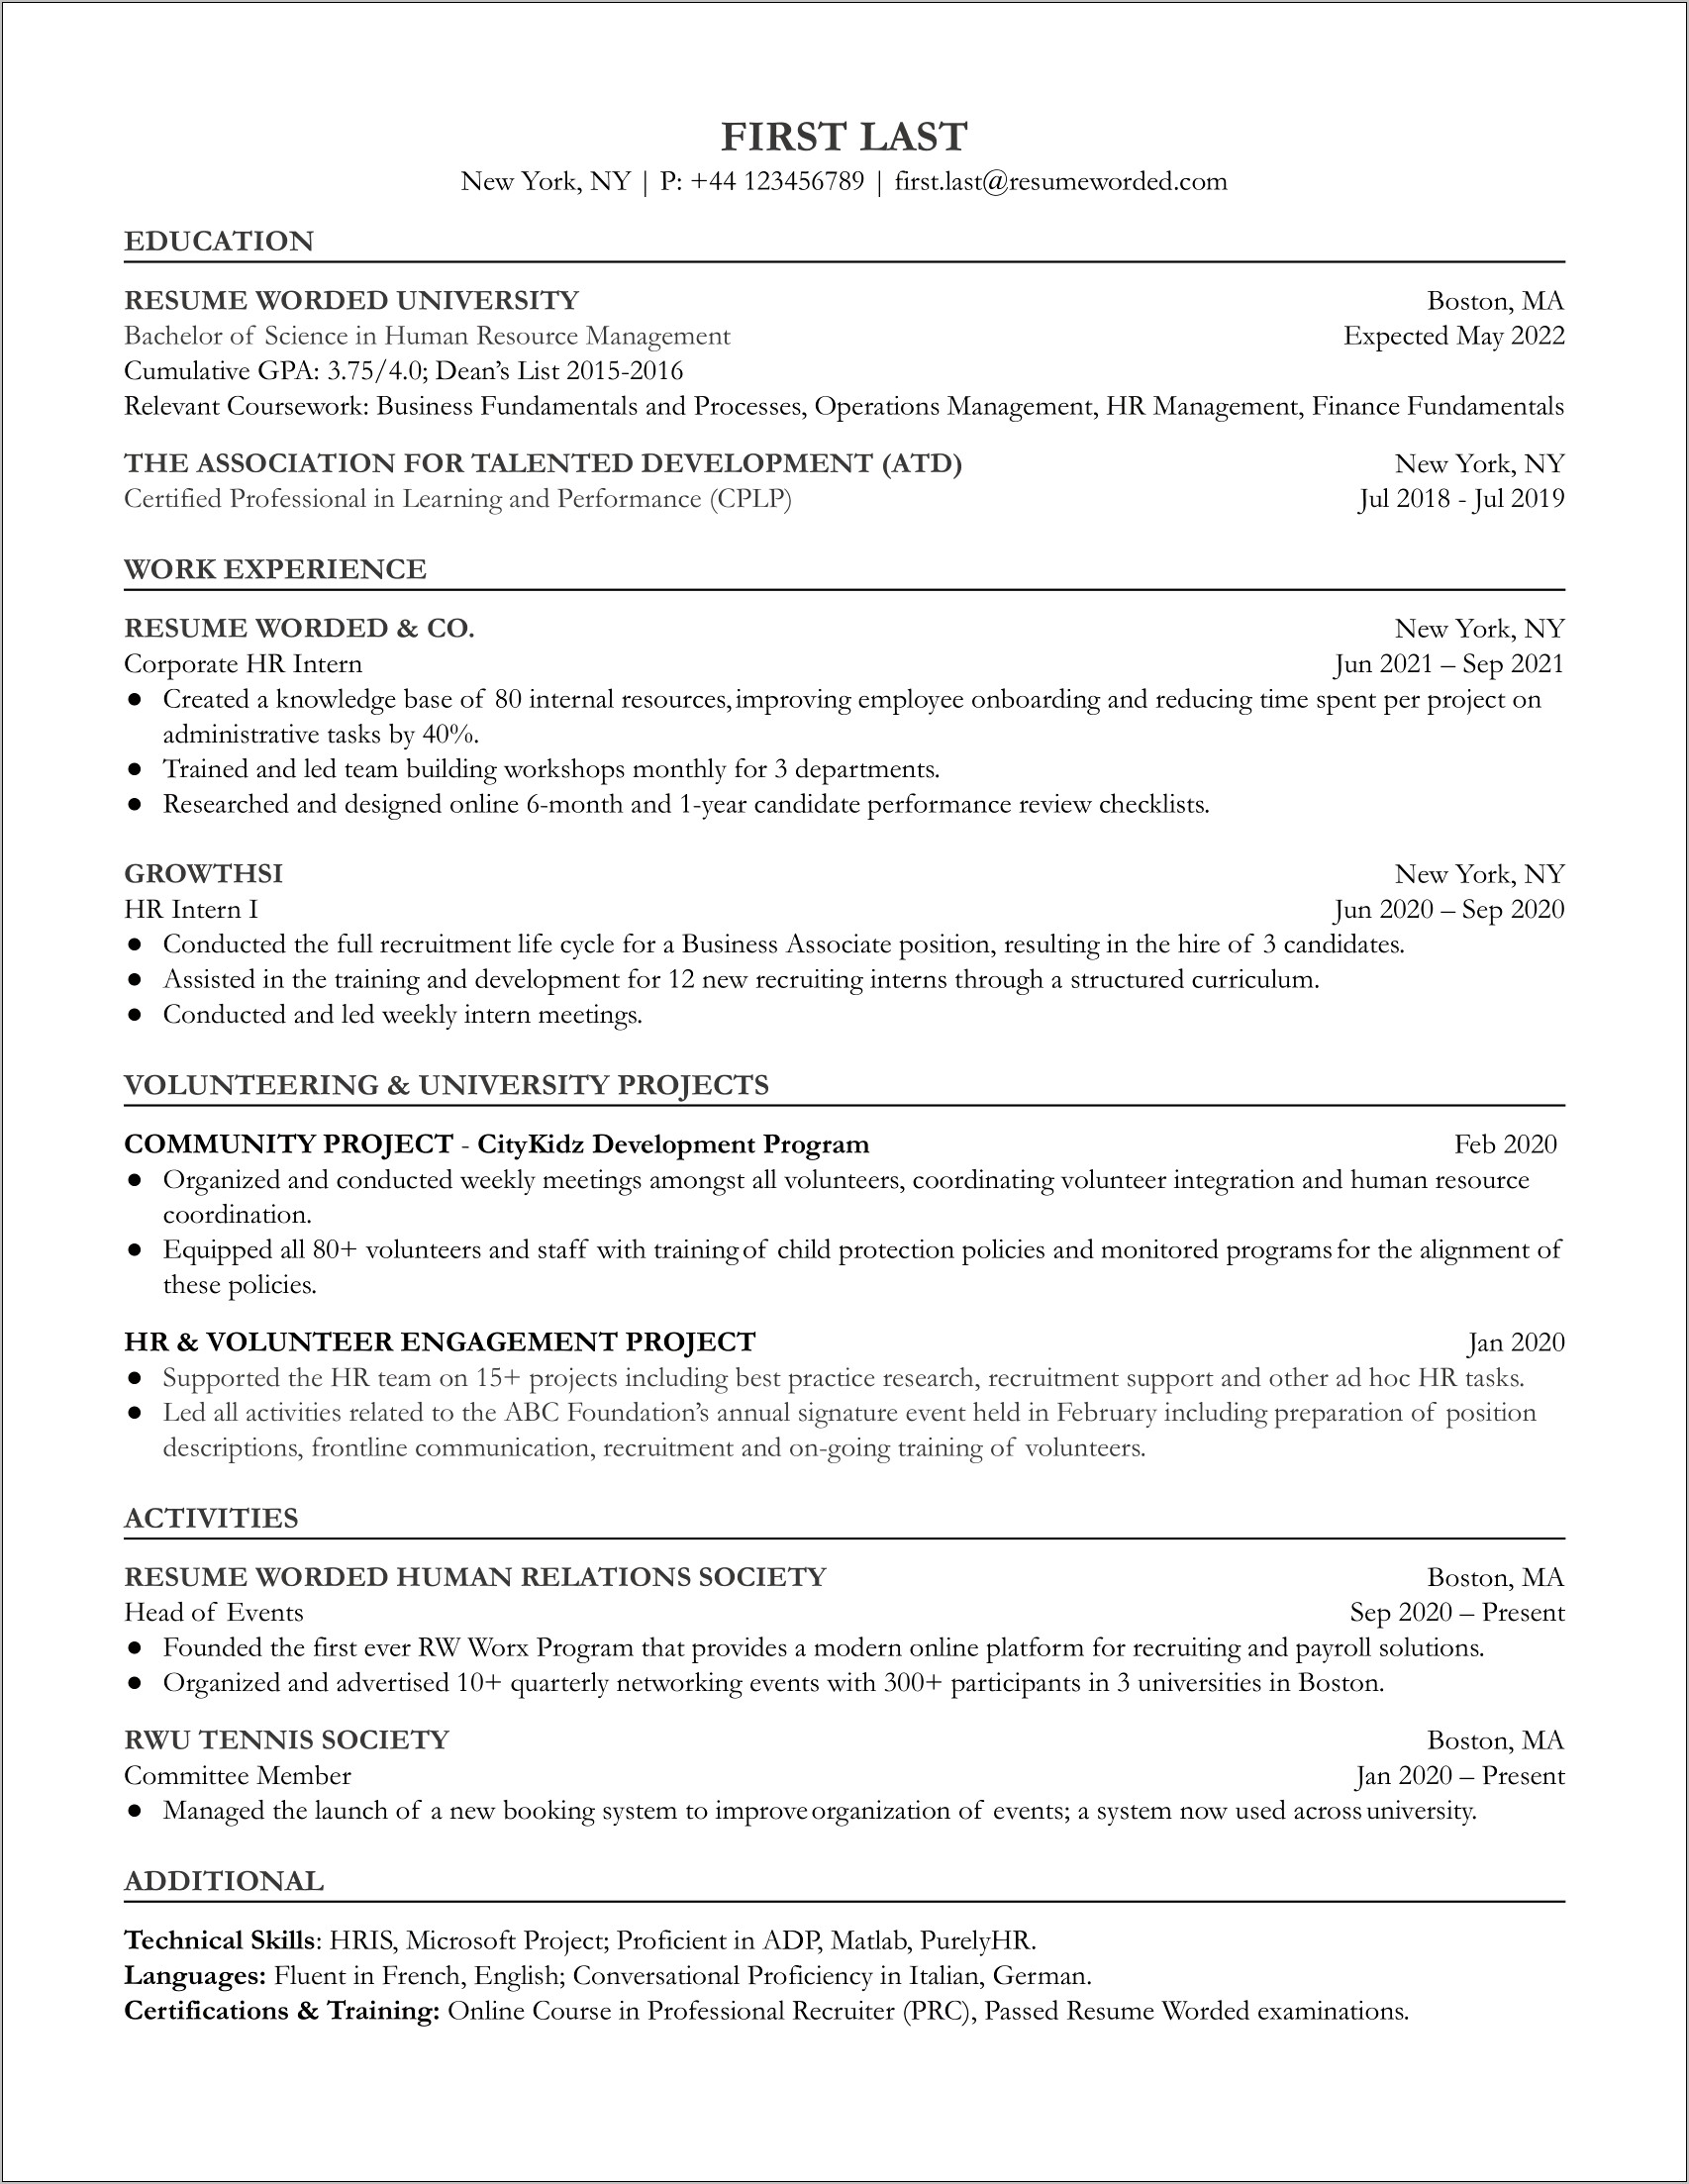 Sample Resume Objective For Entry Level Clerical Position